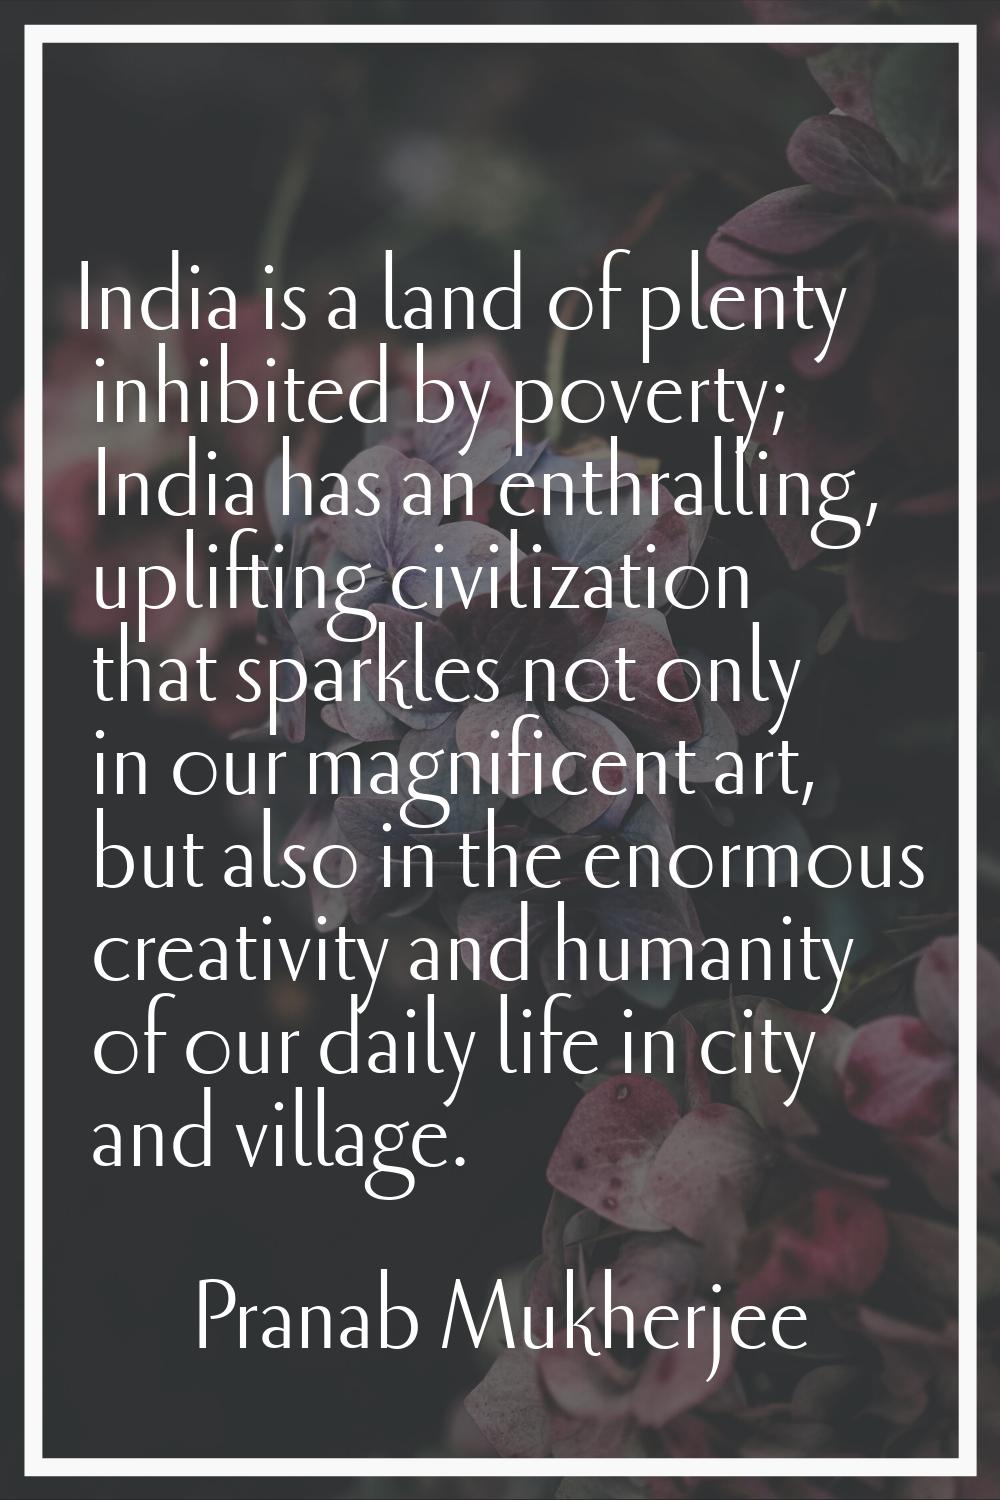 India is a land of plenty inhibited by poverty; India has an enthralling, uplifting civilization th